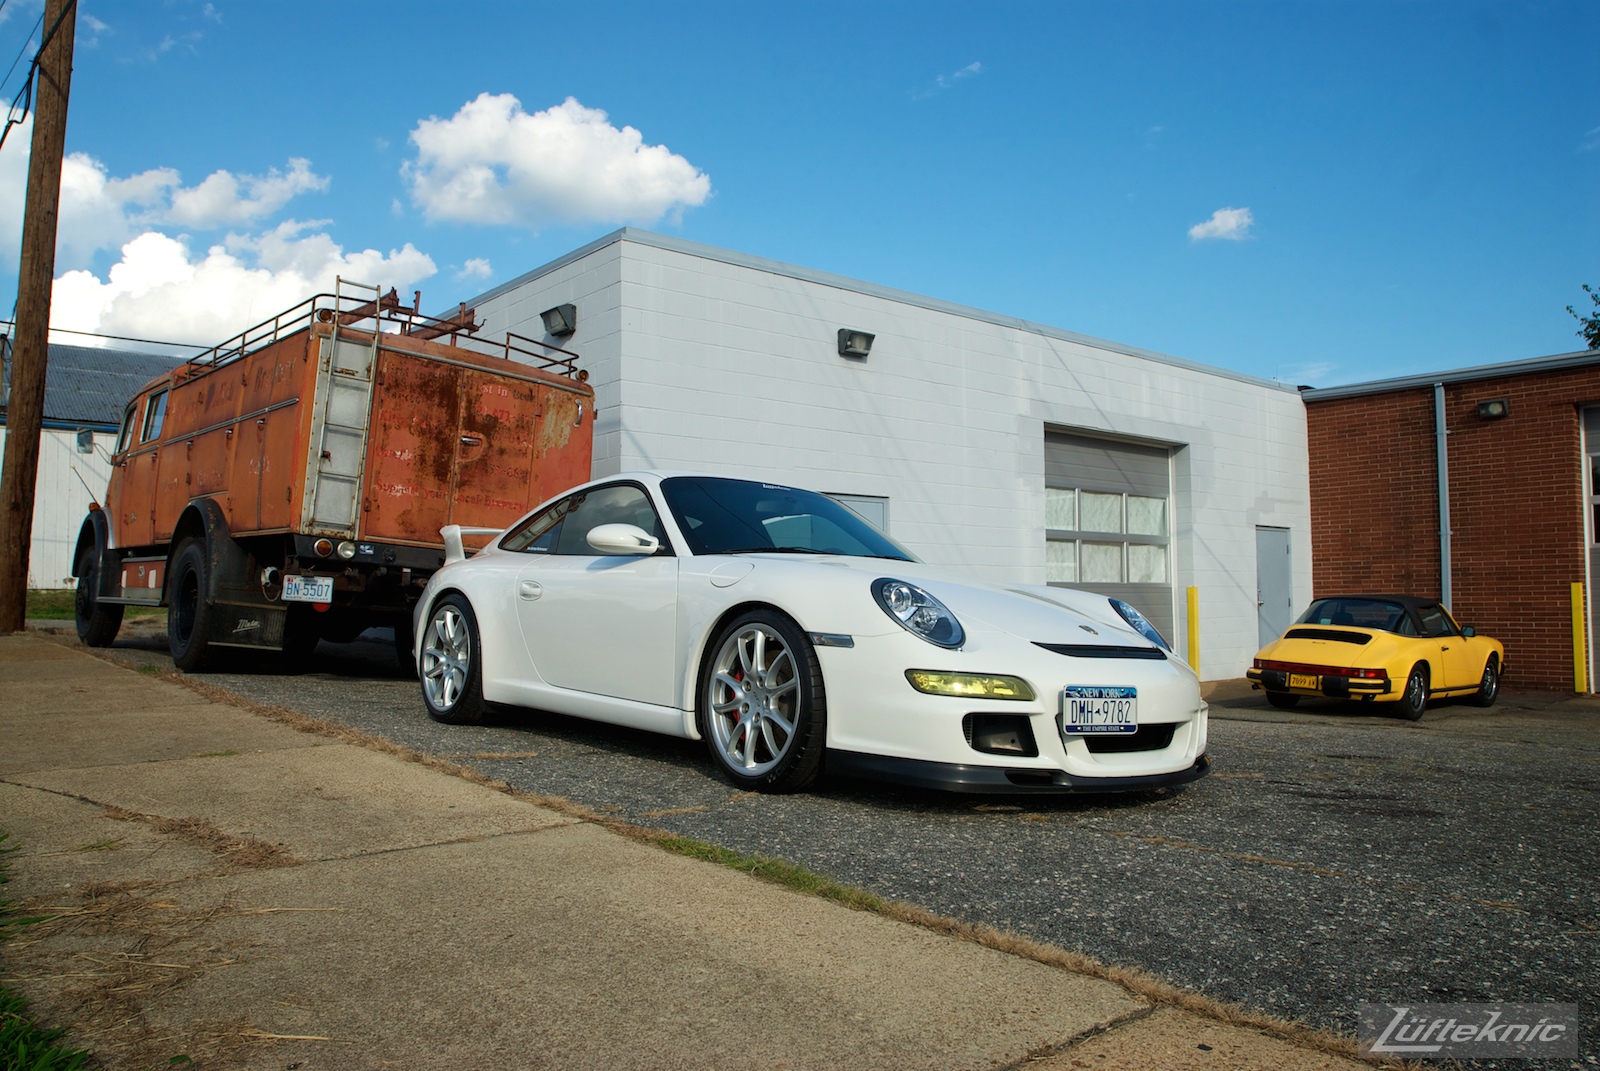 A white Porsche Gt3 poses with the Lufteknic fire truck in the parking lot, with an old yellow 911 Targa in the background.